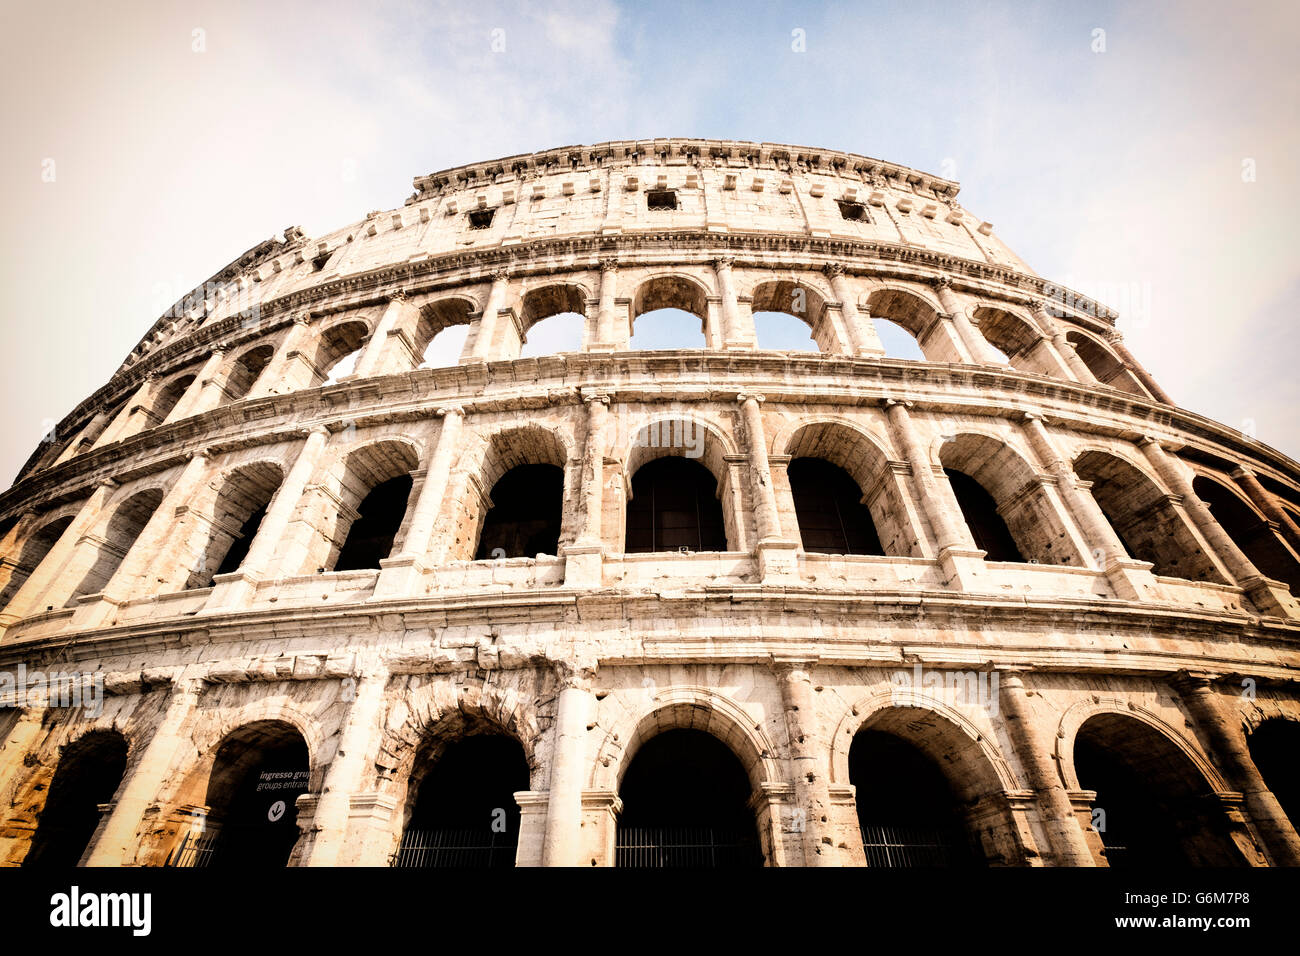 Detail of the Colosseum in Rome Italy Stock Photo